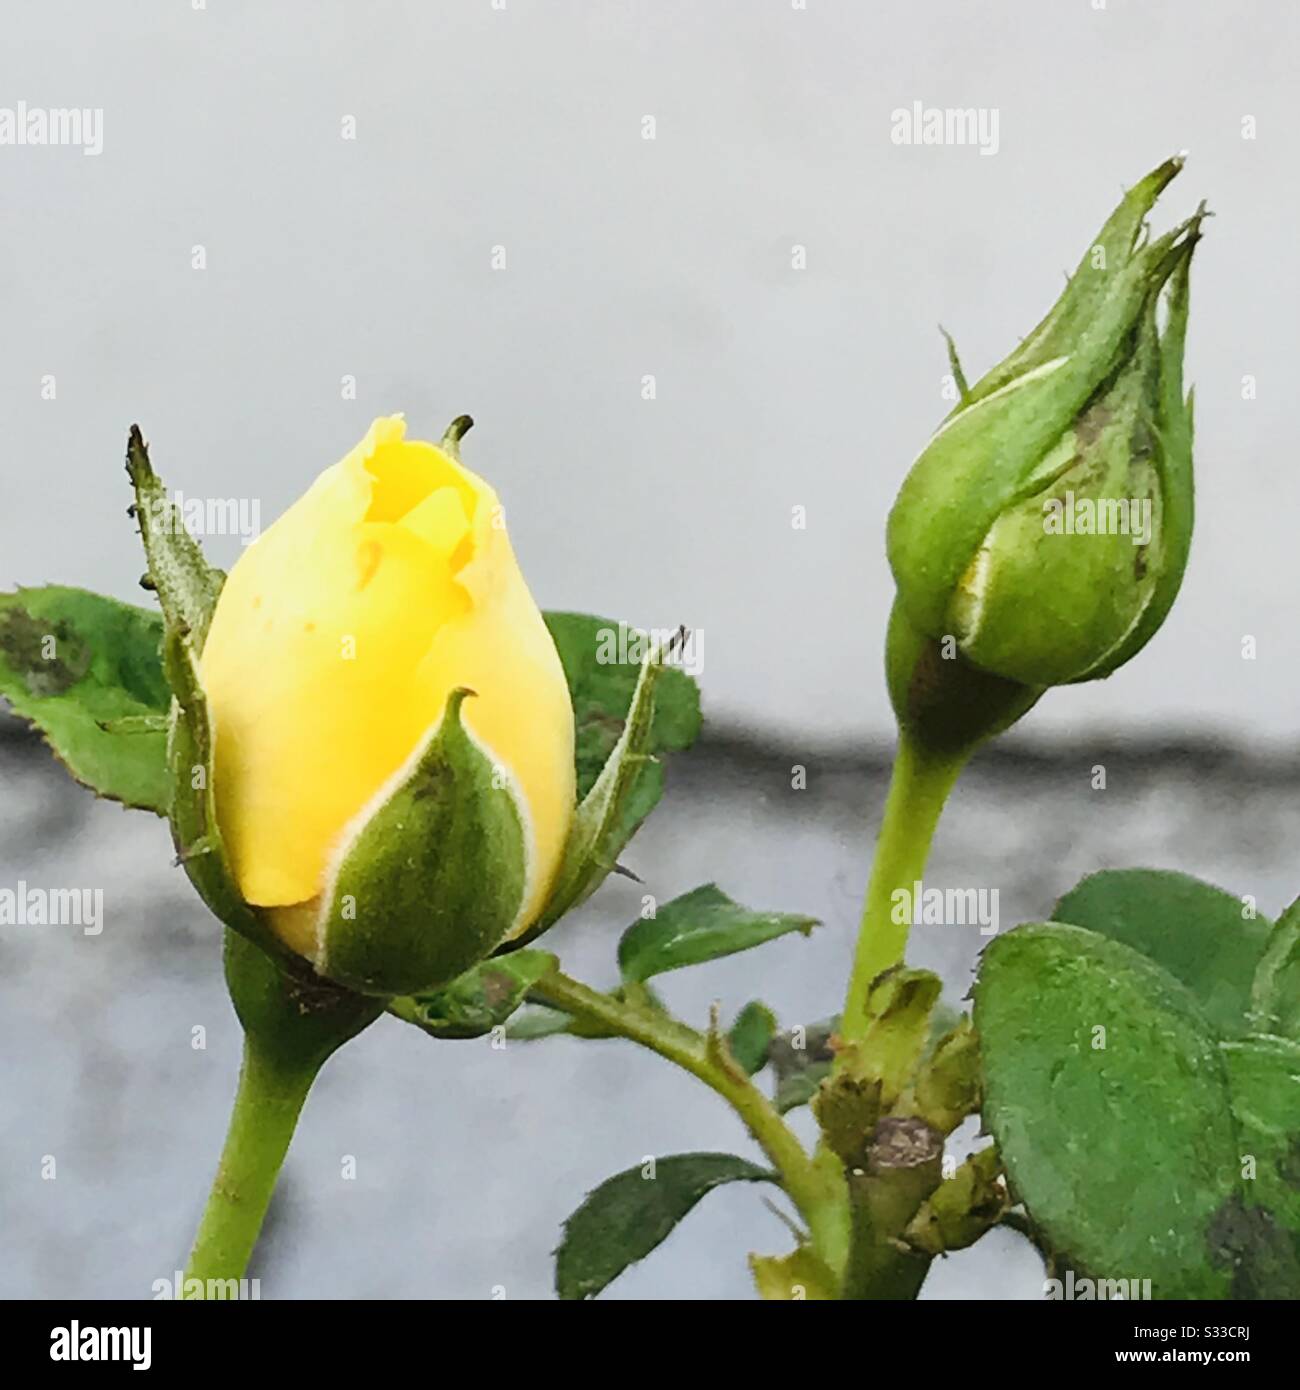 https://c8.alamy.com/comp/S33CRJ/2-buds-colourful-aromatic-bright-yellow-rose-buds-single-stalk-proposal-flower-valentines-day-flower-rose-plant-in-my-garden-in-india-S33CRJ.jpg